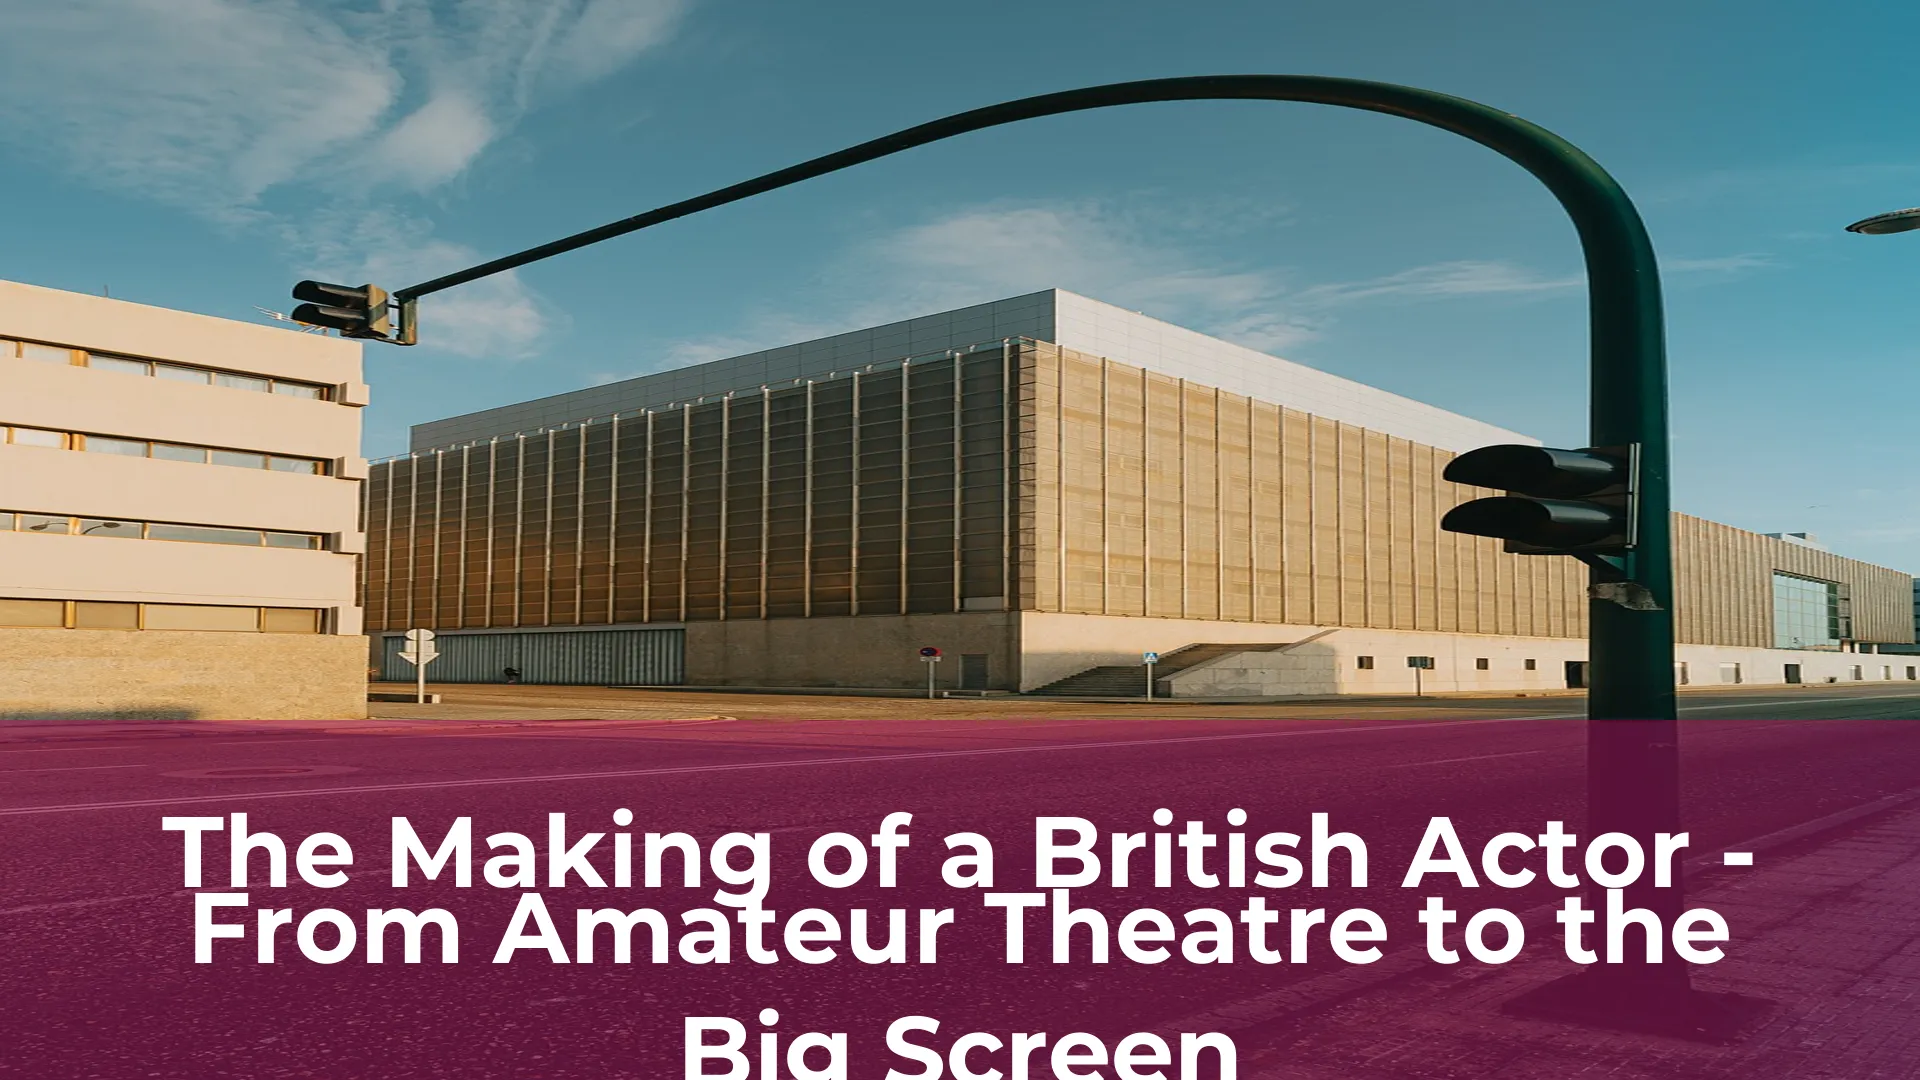 The making of a british actor from amateur theatre to the big screen